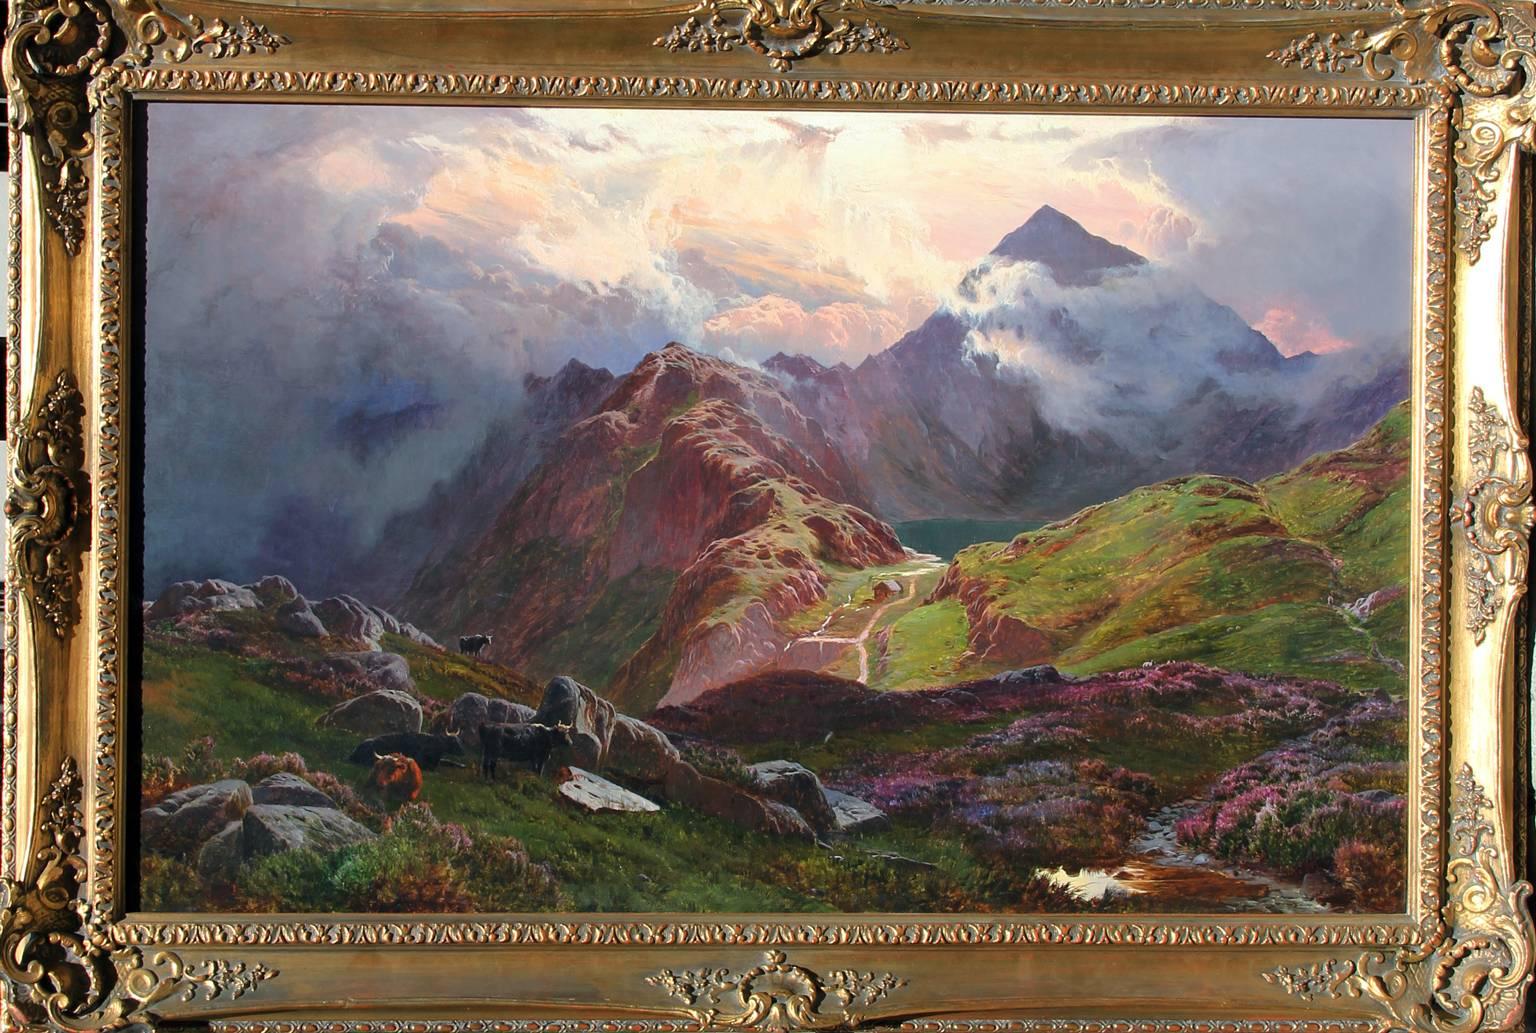 SIDNEY RICHARD PERCY
British, 1821–1886

Snowdon, from above Llyn Llydaw, North Wales

Signed and dated S.R. Percy 186-; also signed and titled on a label attached to the stretcher
Oil on canvas
24 x 38 inches (61 x 96.5 cm)
Framed: 31 x 45 inches